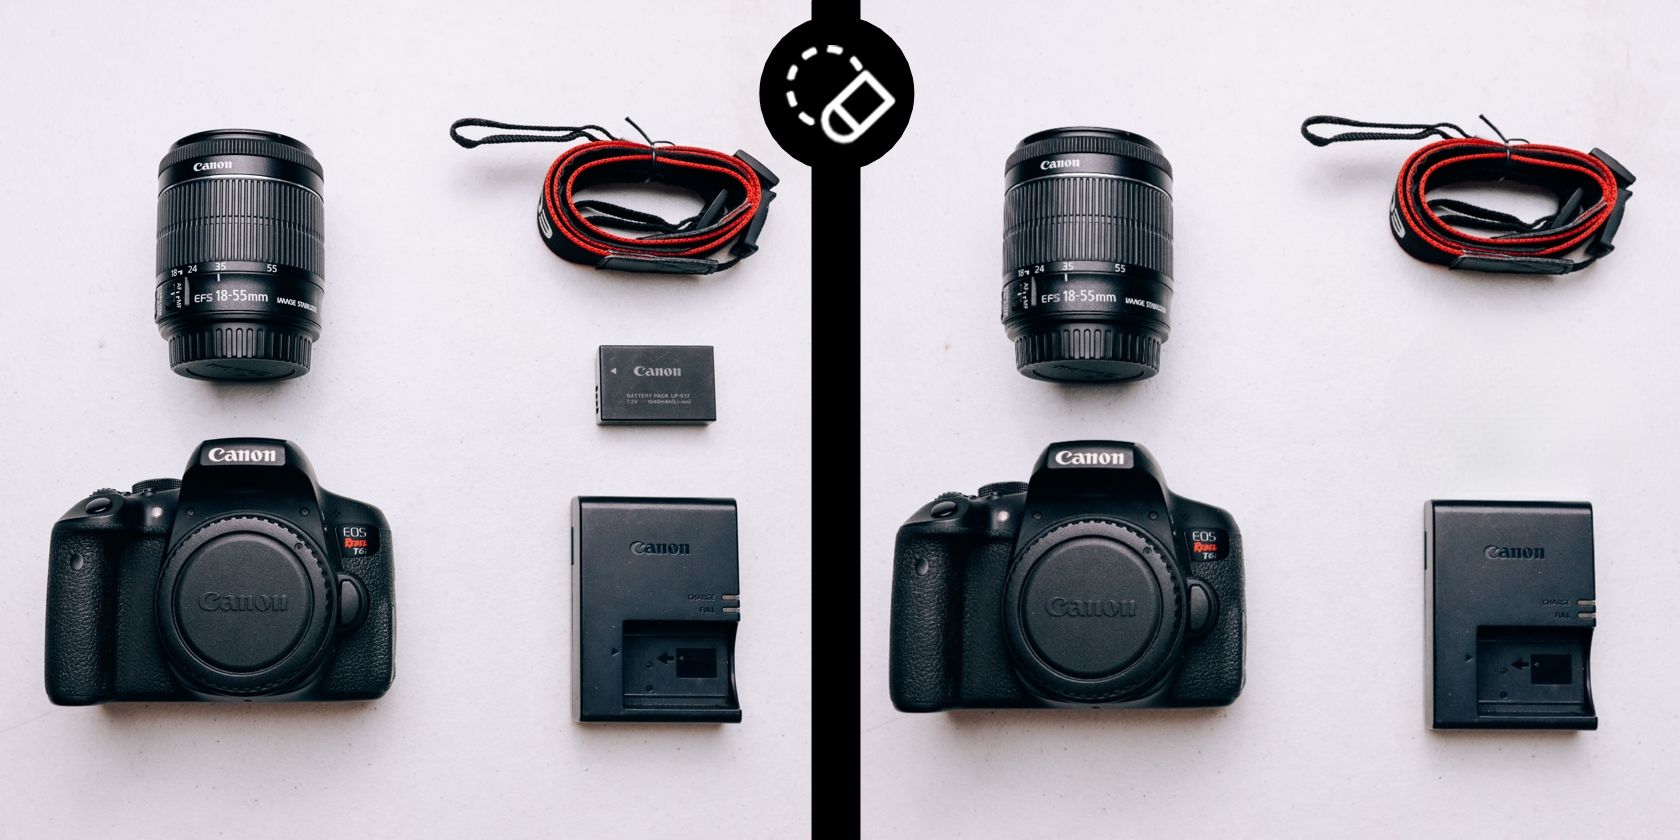 An image of a camera and several parts laid out on a table, before and after Object Eraser was used to remove the camera battery from the image.